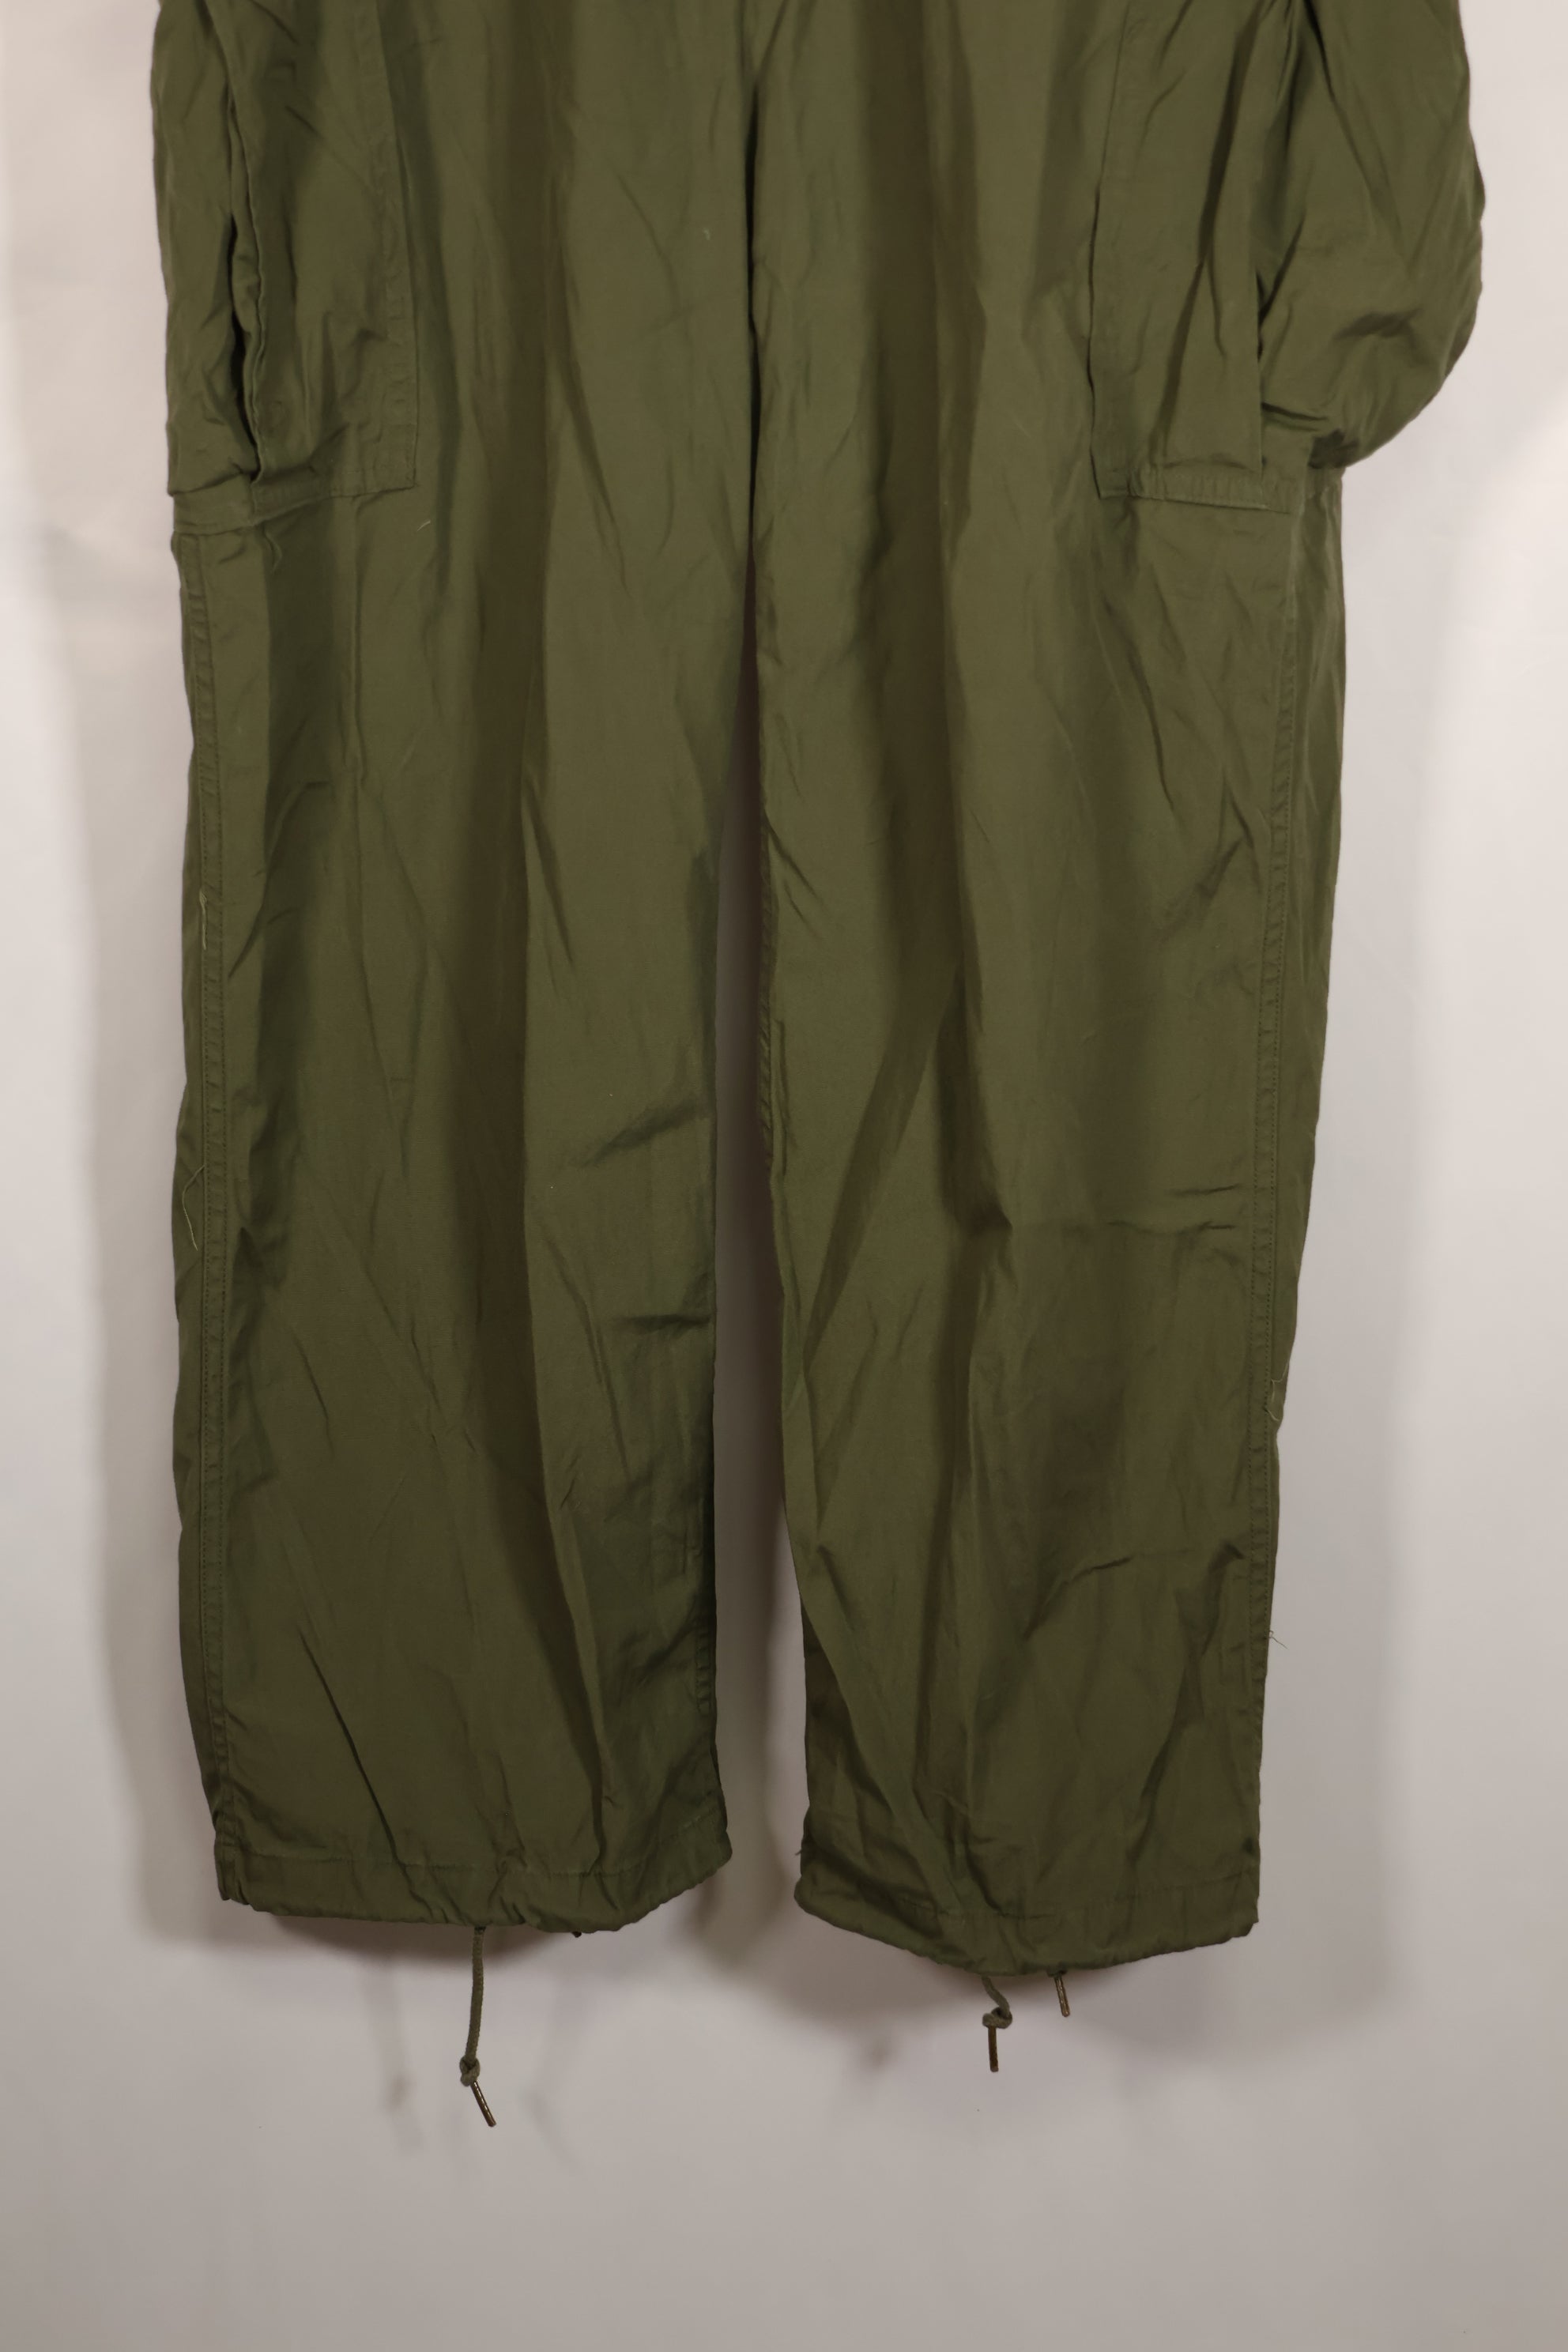 Real 2nd Model Jungle Fatigue Pants Large-Regular, almost unused, with leg ties